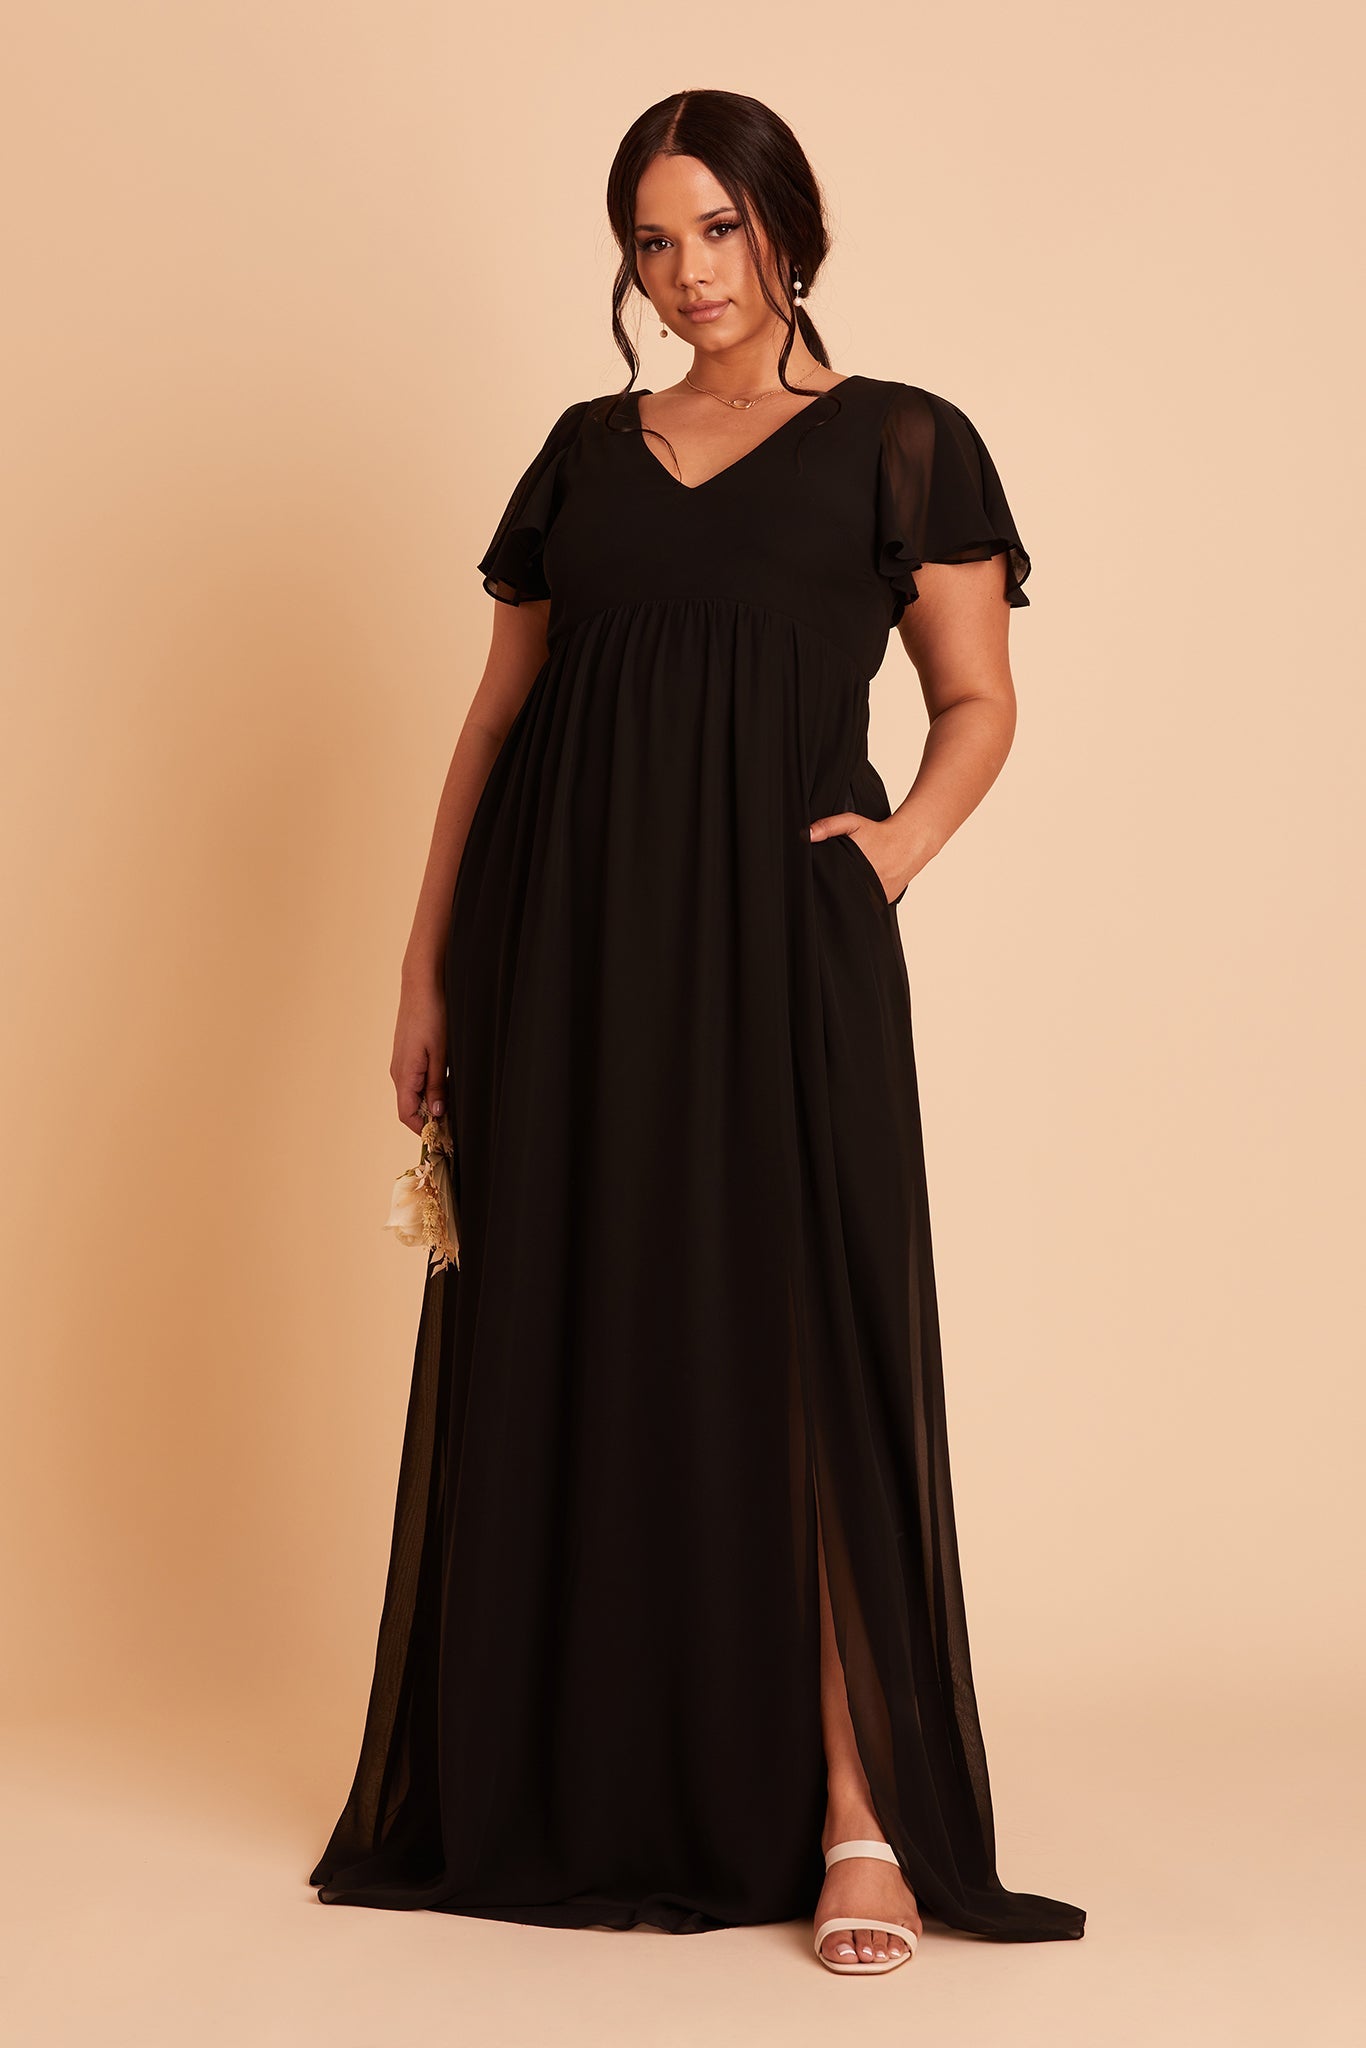 Hannah empire plus size bridesmaid dress in black chiffon by Birdy Grey, hand in pocket, front view